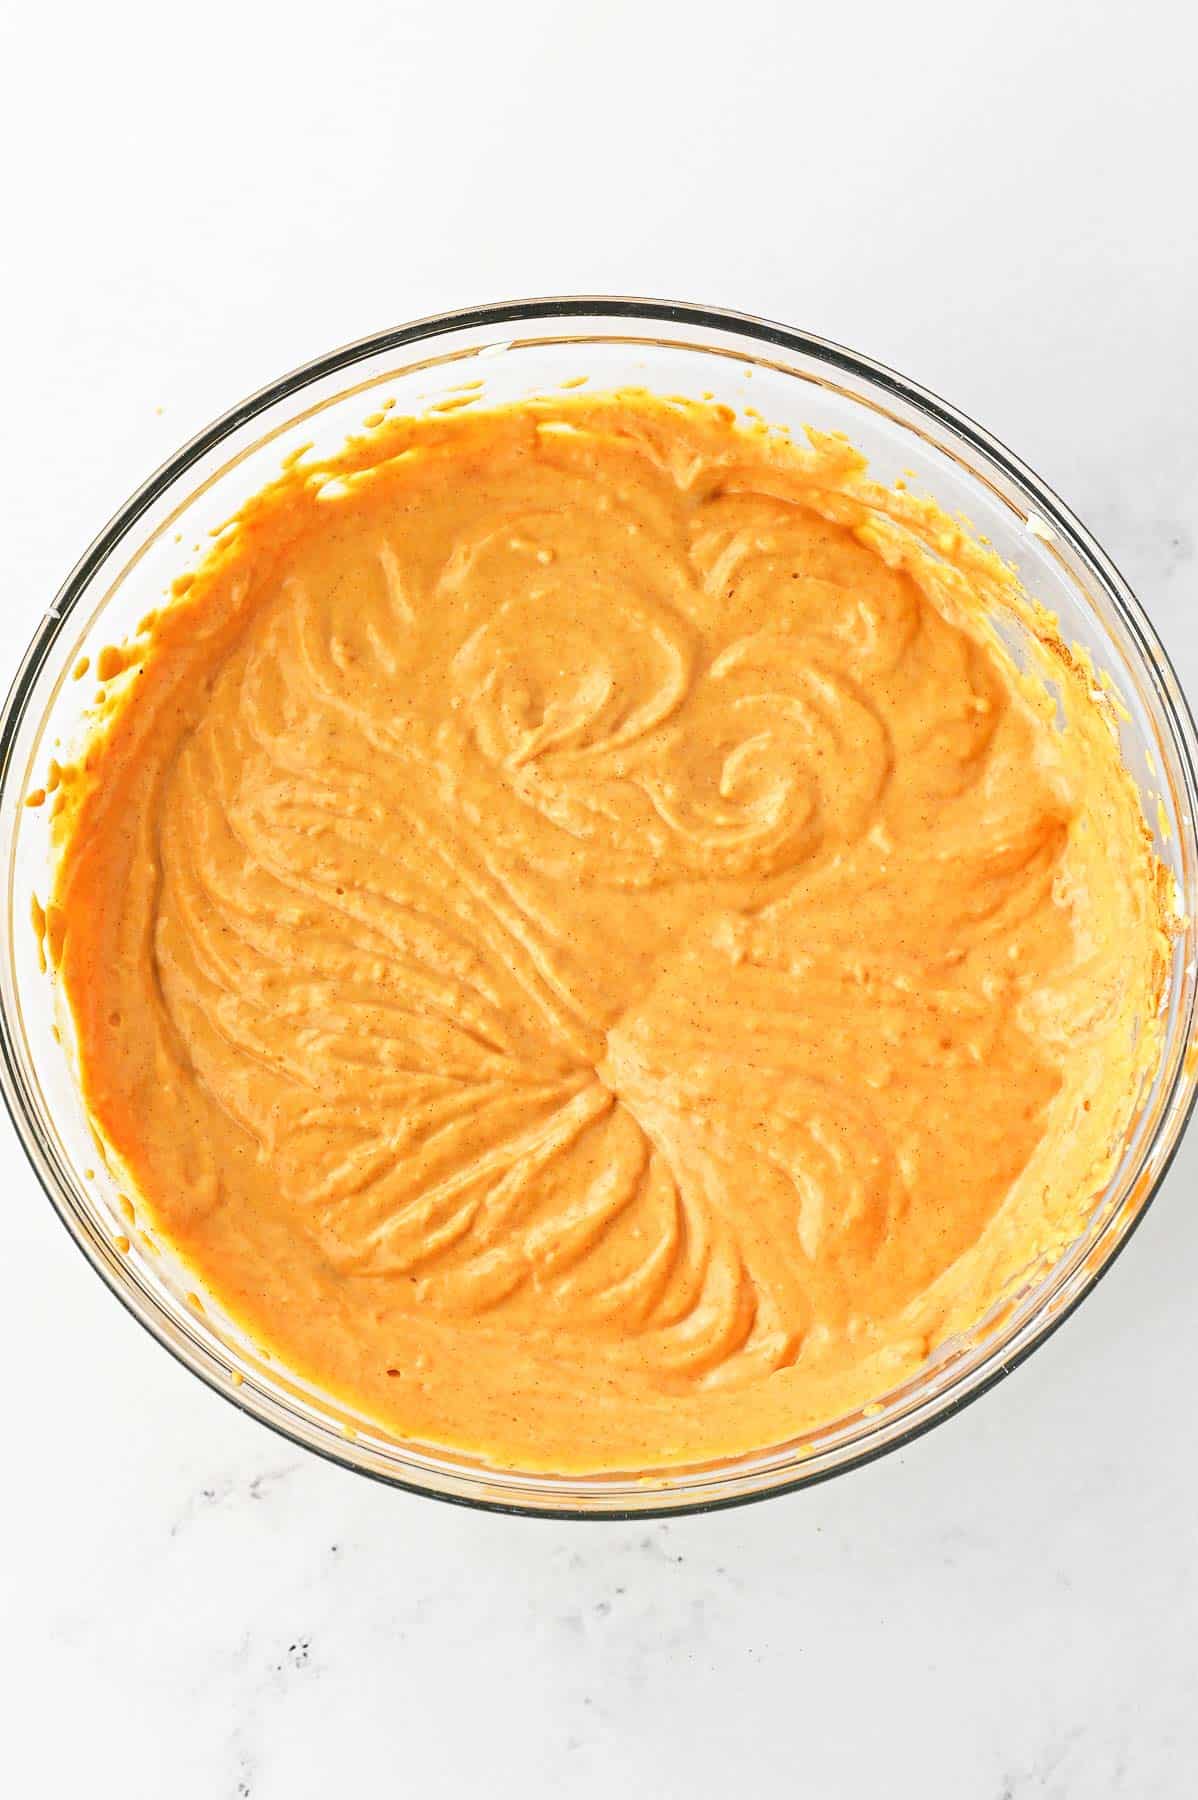 Pumpkin cheesecake mixture in a large glass bowl.